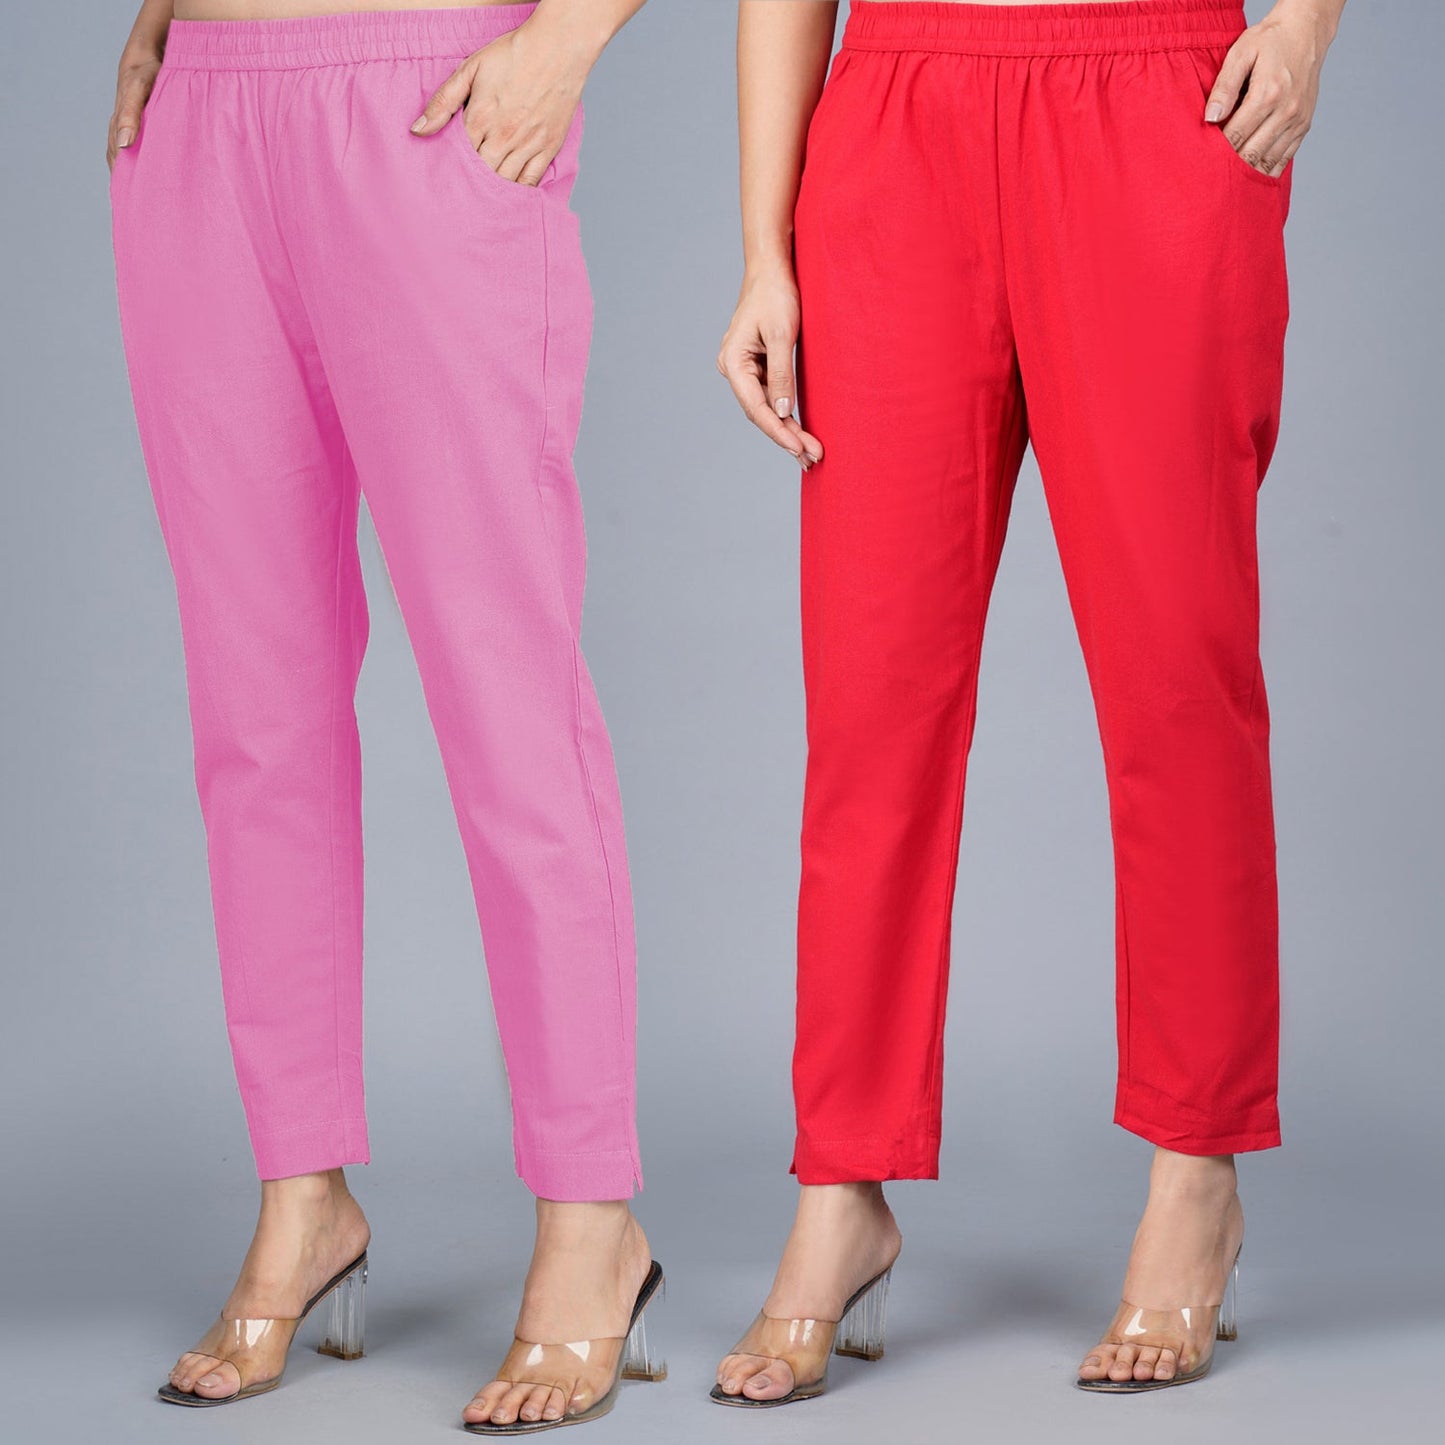 Pack Of 2 Womens Regular Fit Pink And Red Fully Elastic Waistband Cotton Trouser